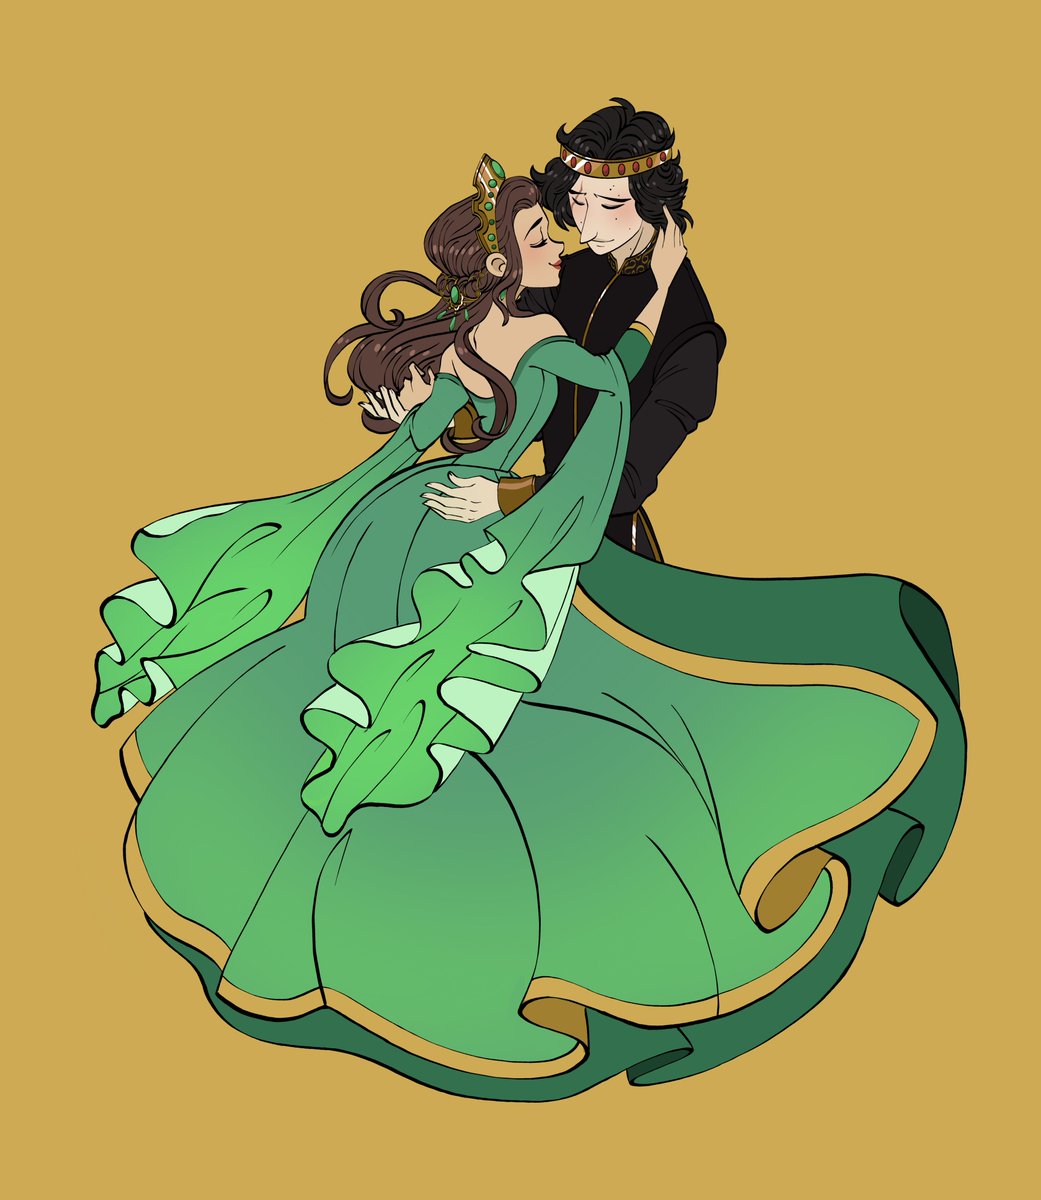 Medieval Reylo Au!! for a pin design.  Imagine this in pin form!!! I cannot wait. #reylo #pincommission #pindesign